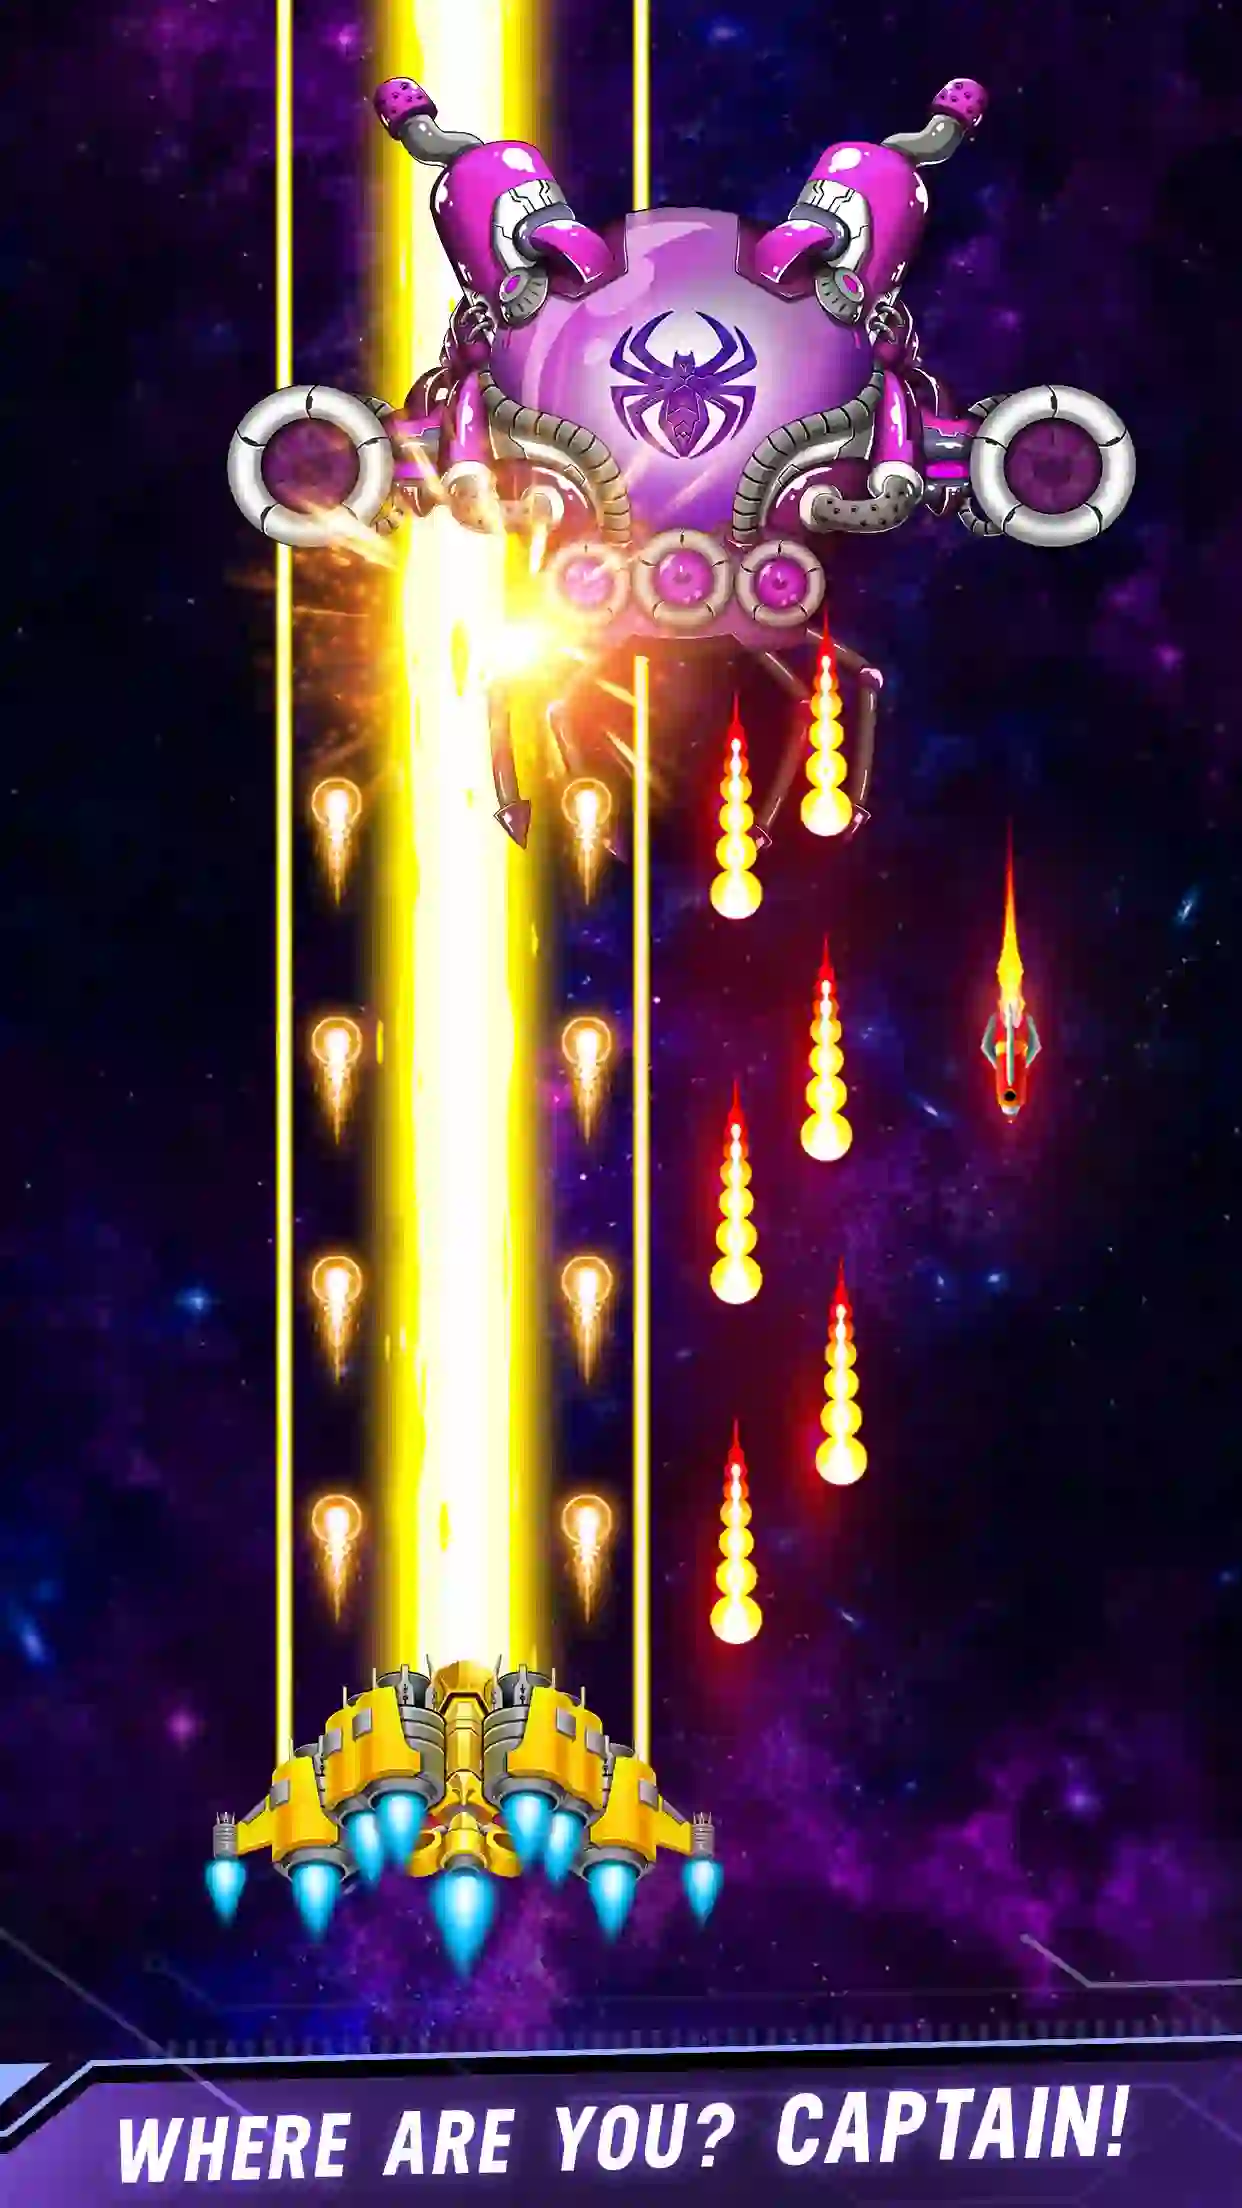 Space shooter - Galaxy attack
